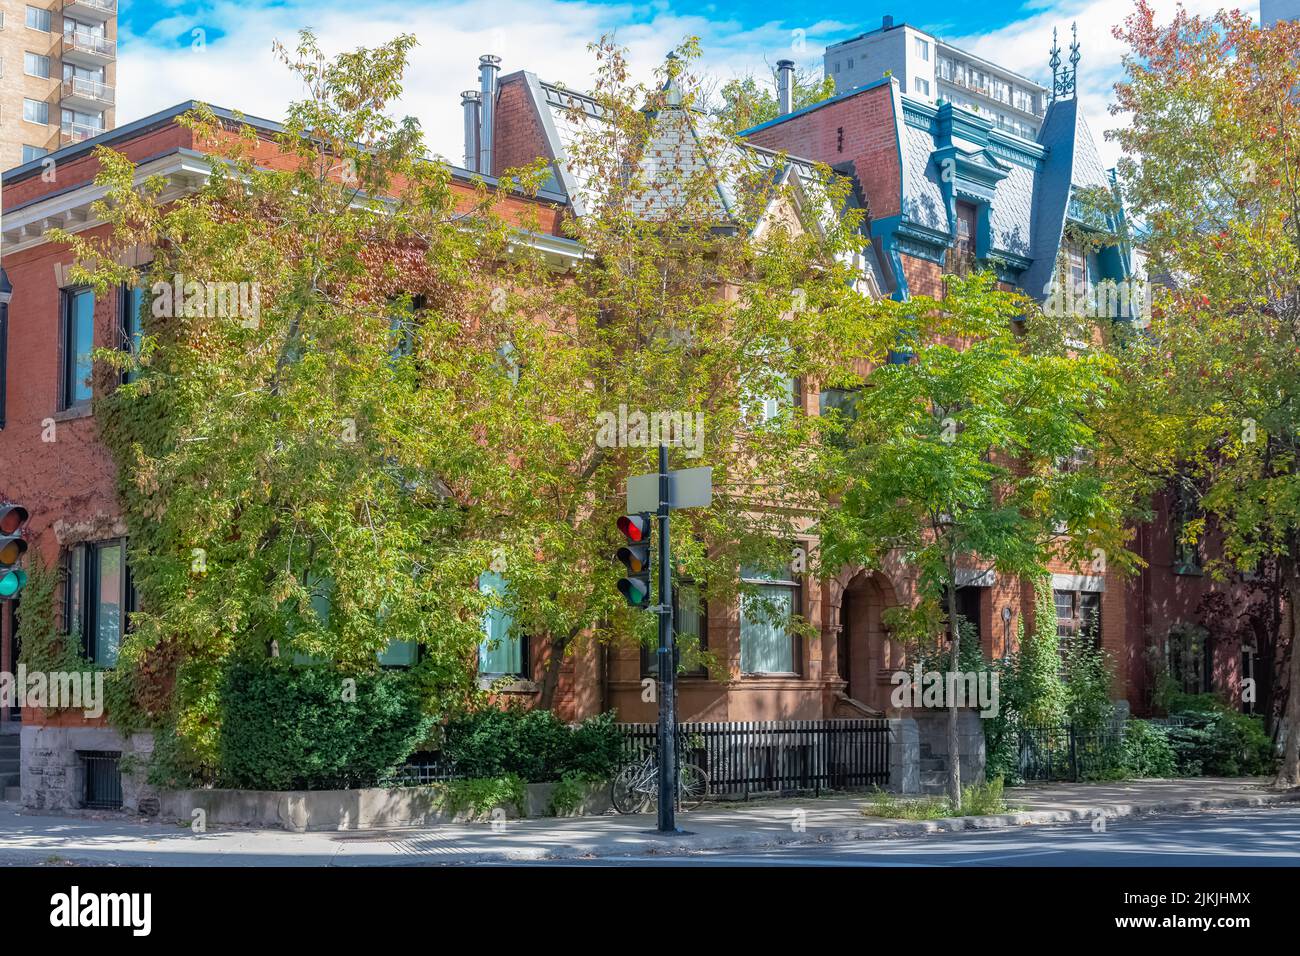 The beautiful building facade surrounded by green vegetation. Montreal, Canada. Stock Photo